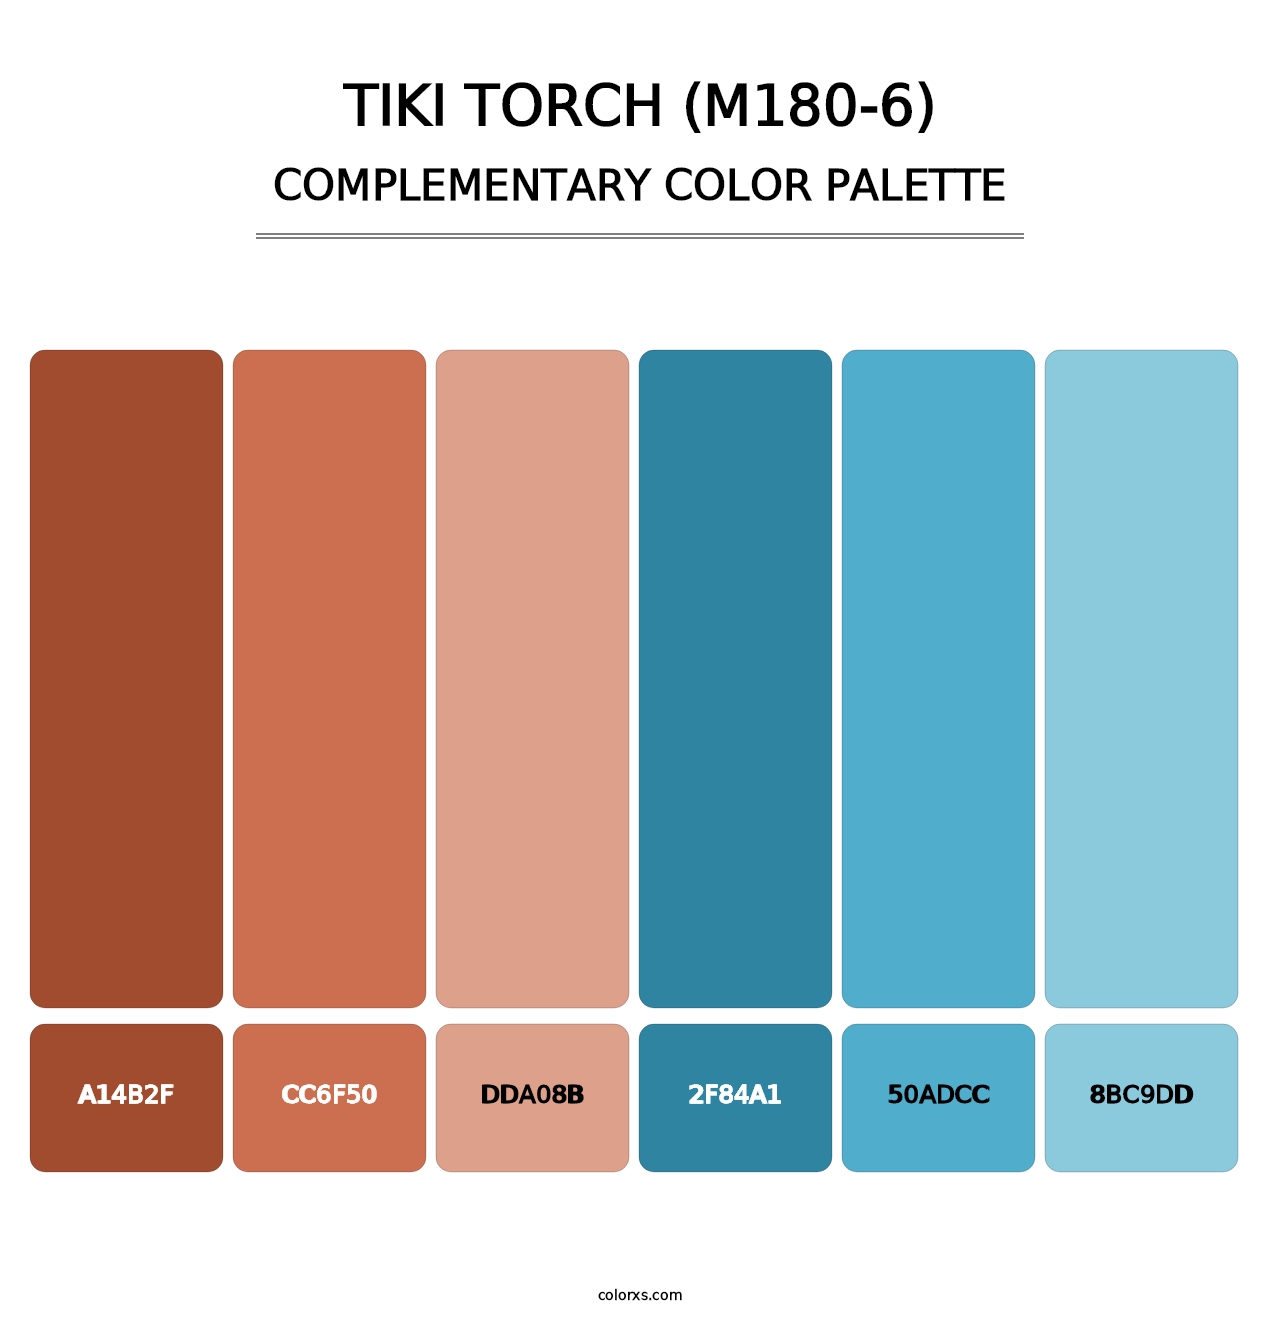 Tiki Torch (M180-6) - Complementary Color Palette